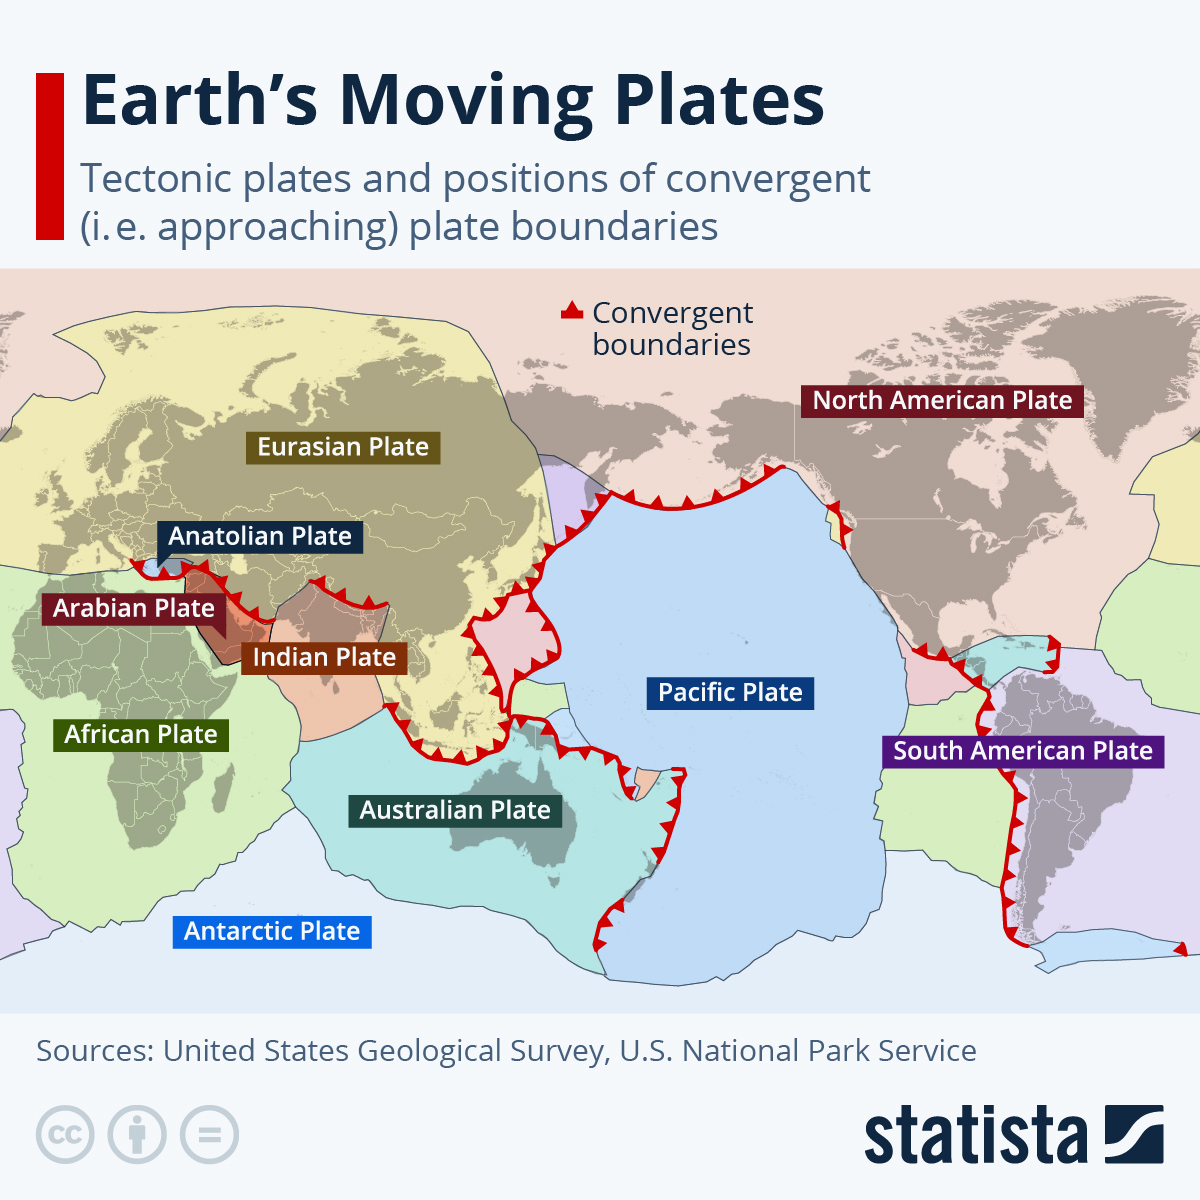 Earth's Moving Plates